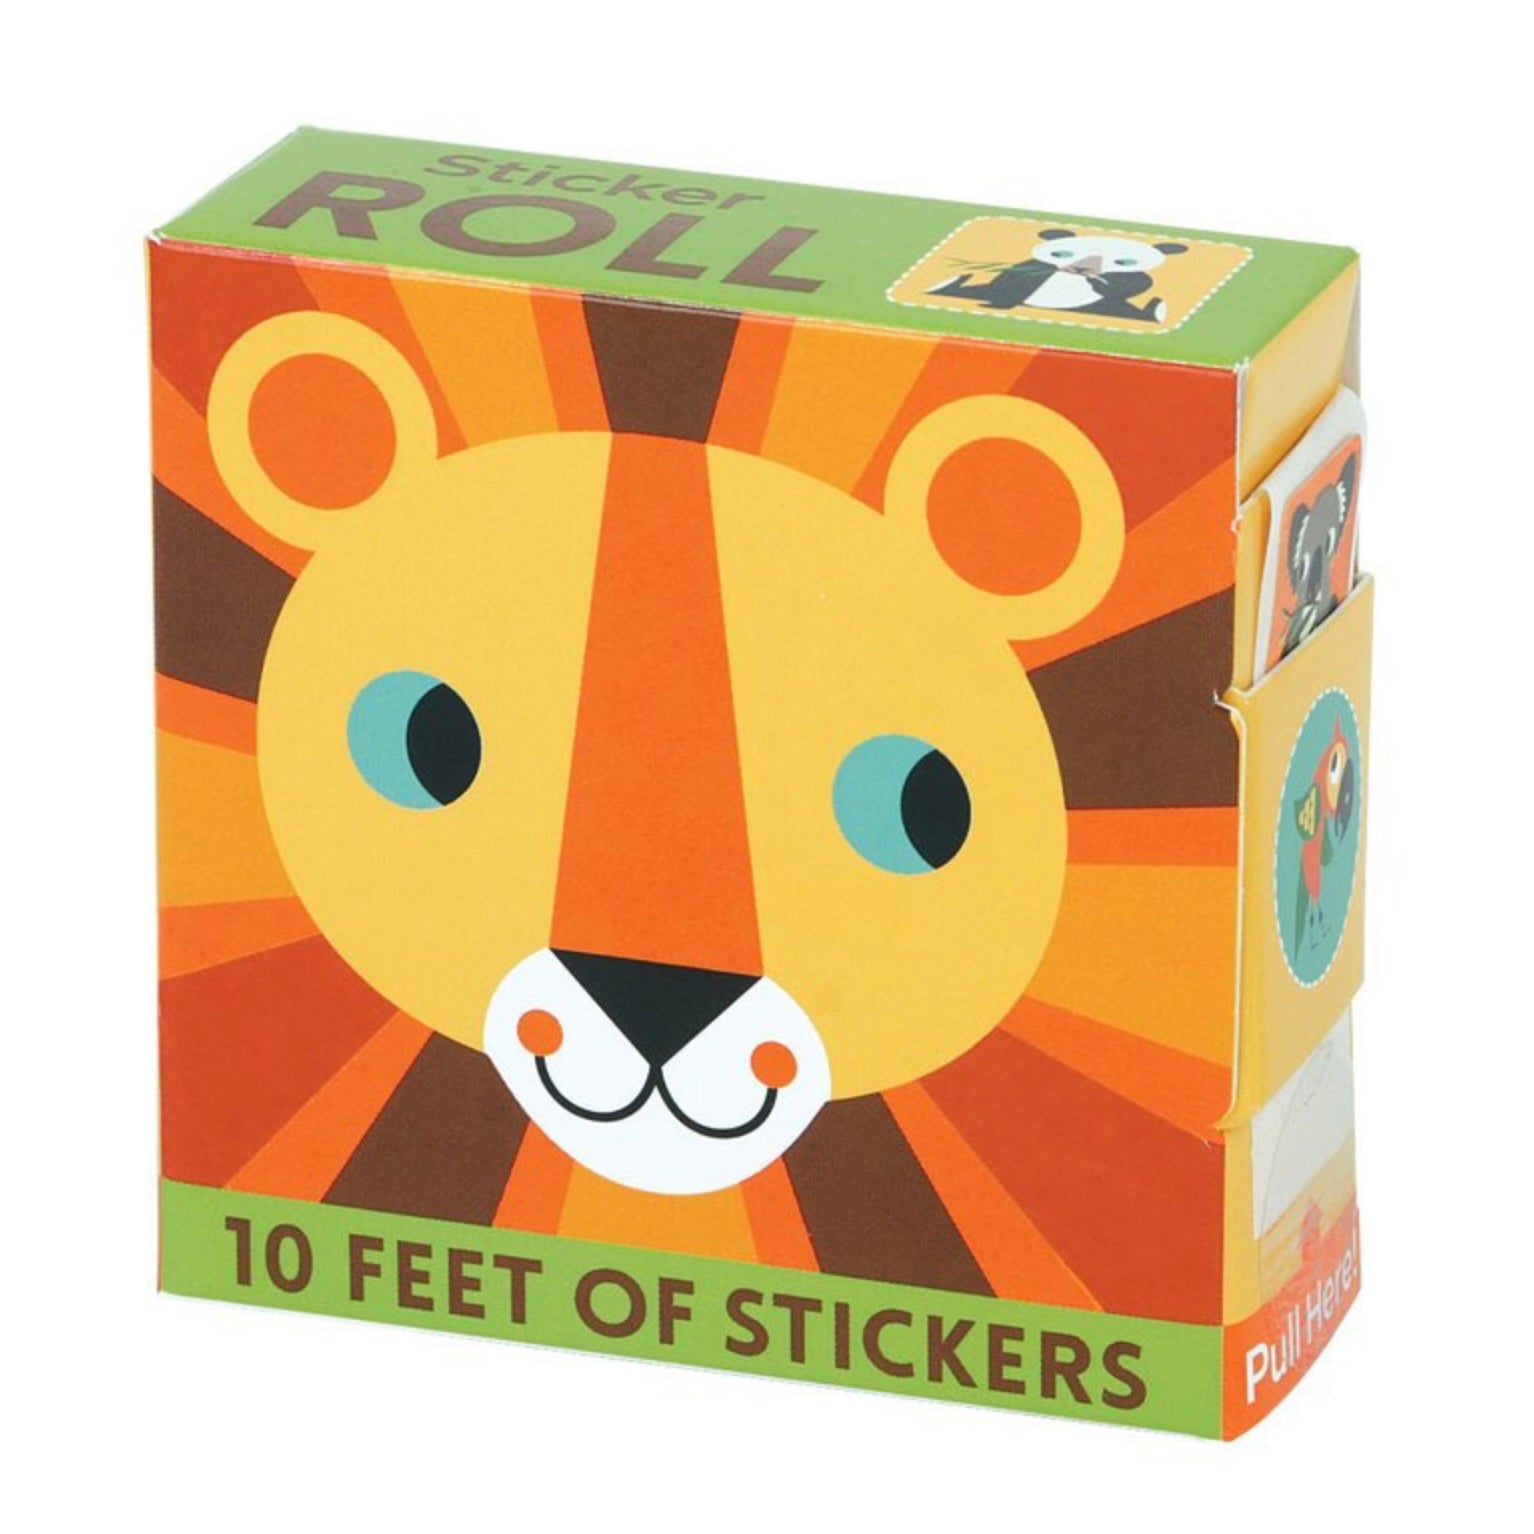 Animals of the World 10 feet of stickers roll